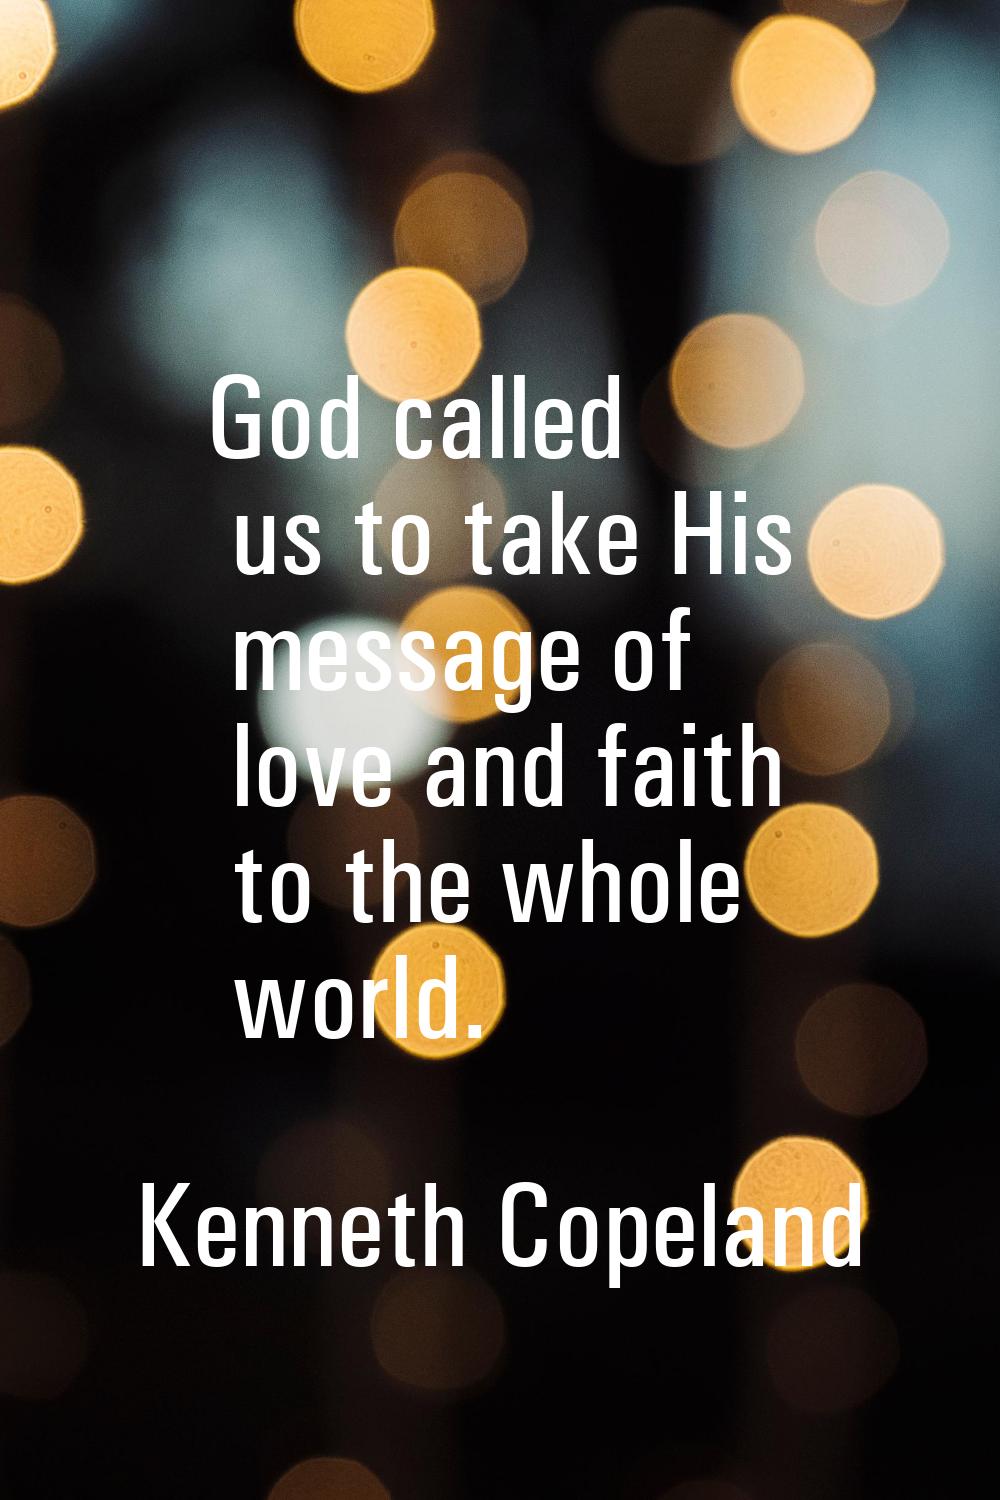 God called us to take His message of love and faith to the whole world.